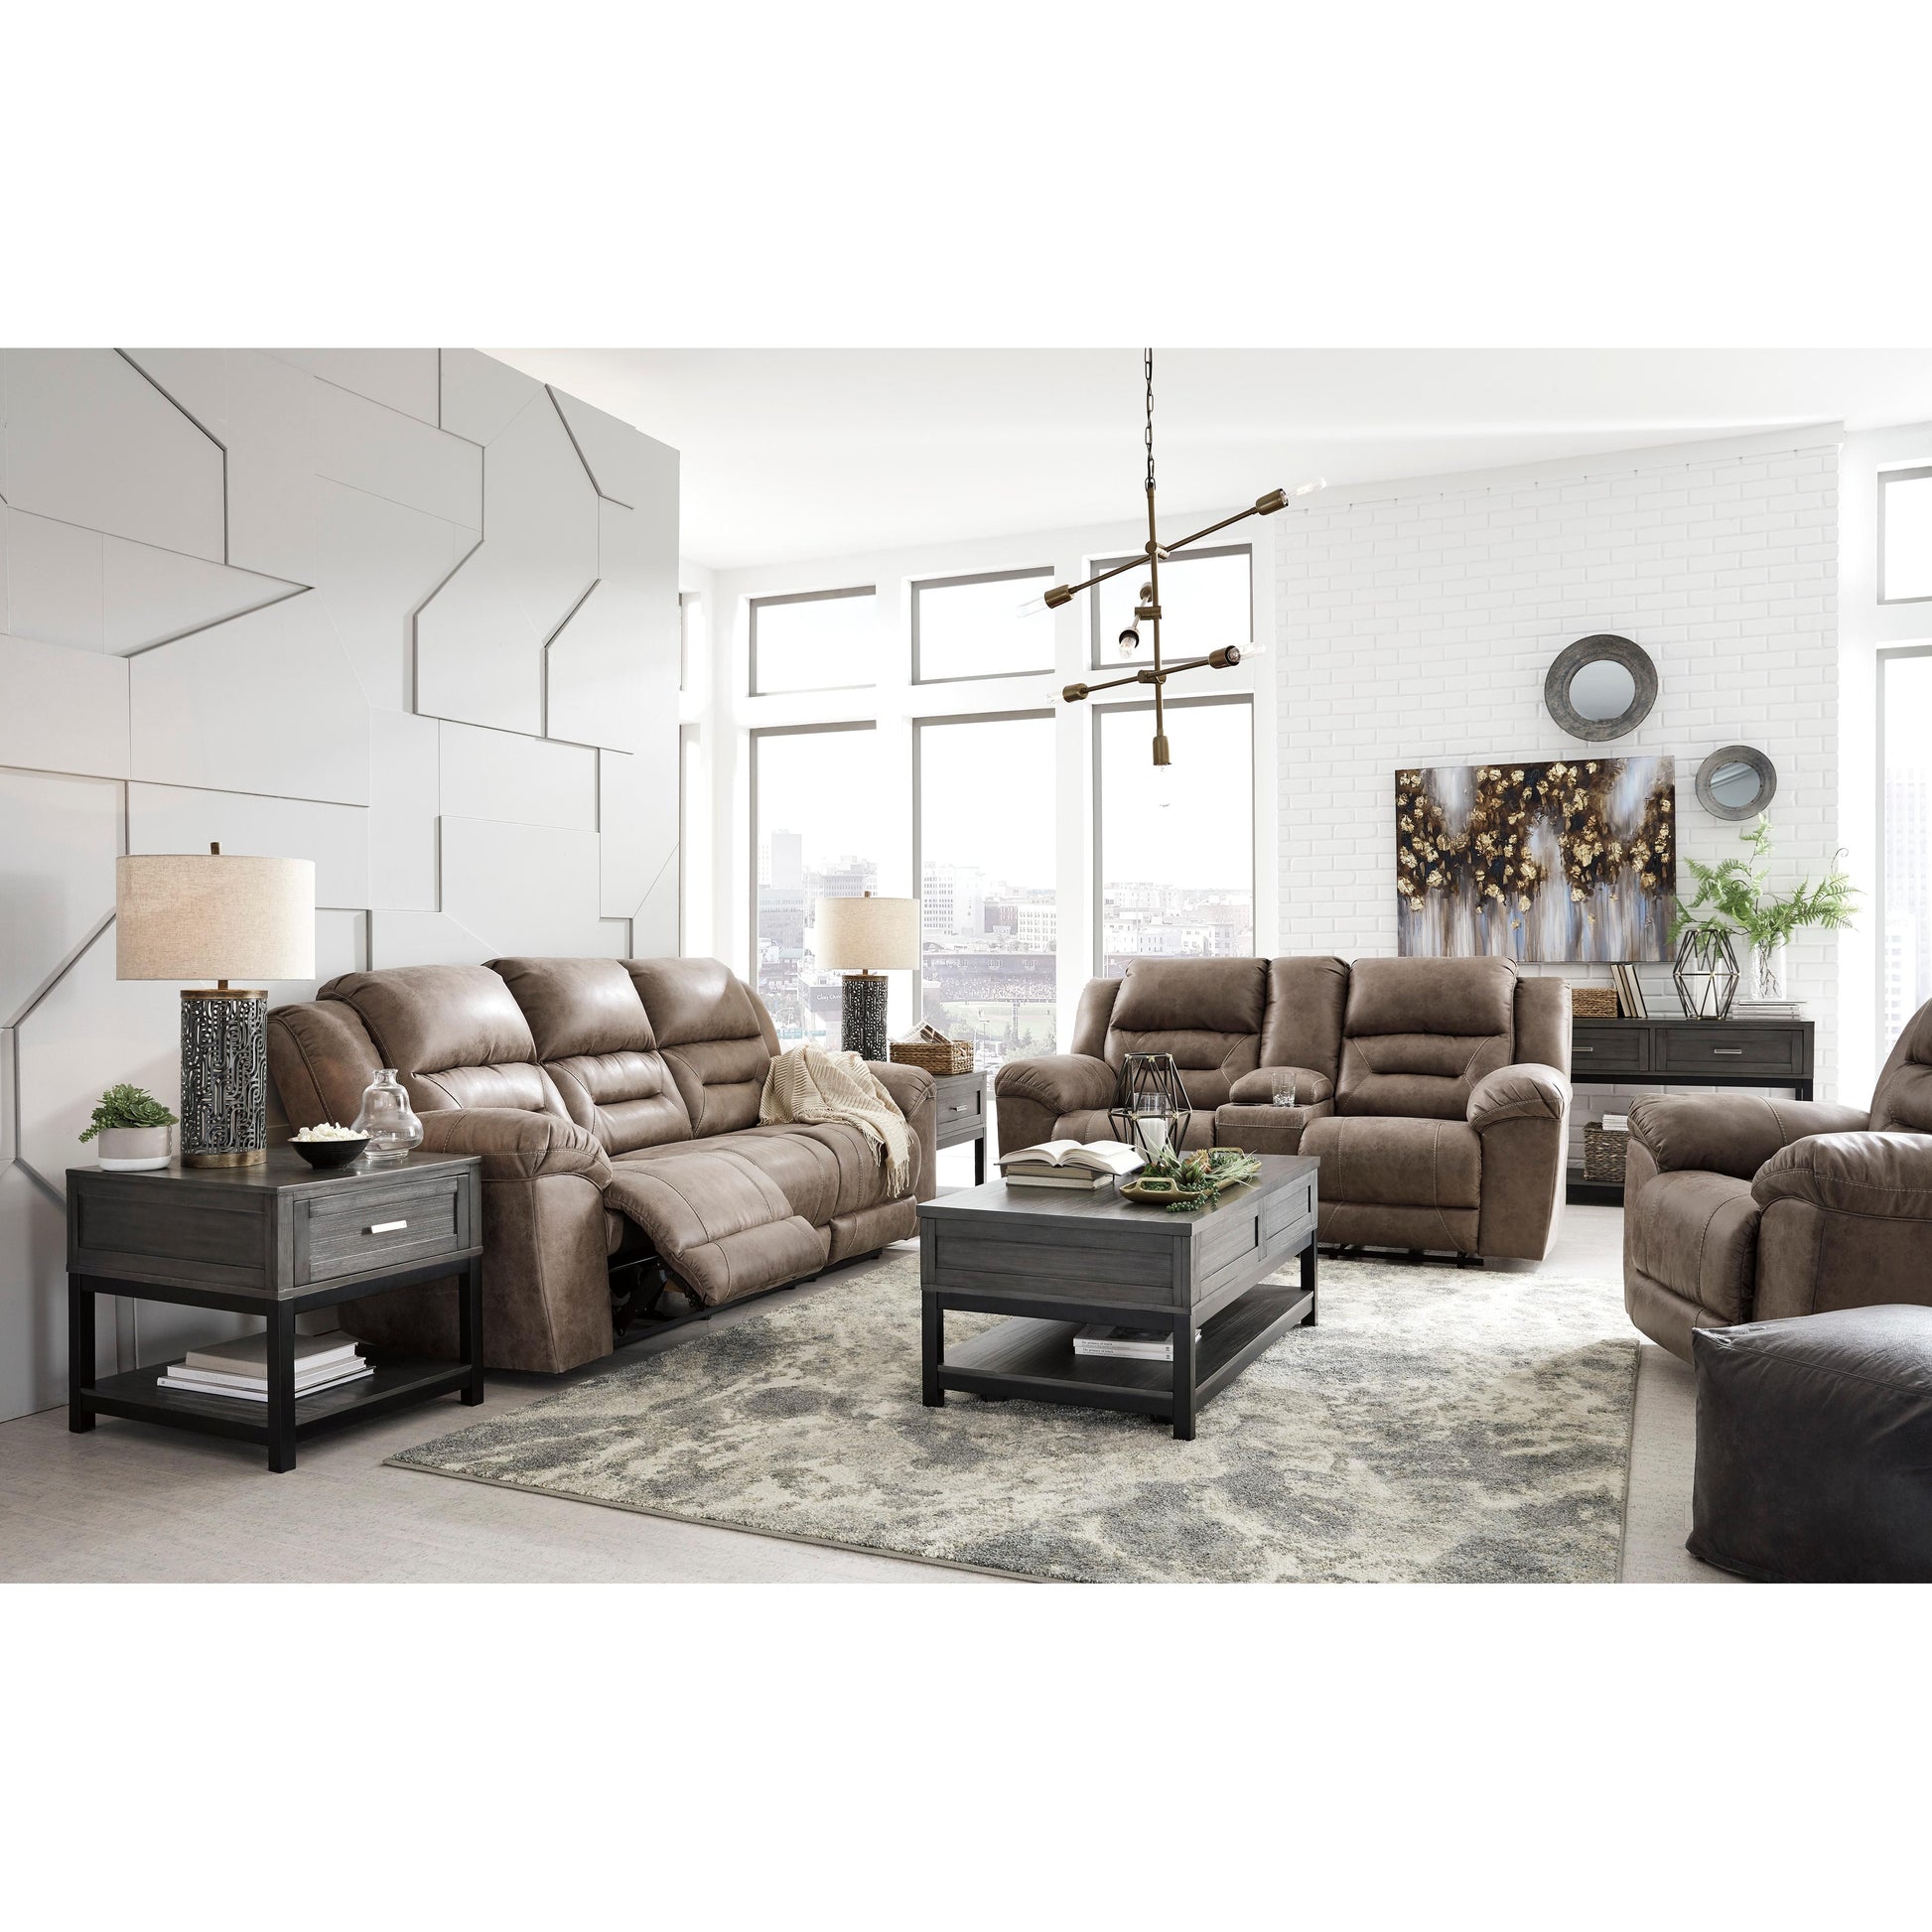 Signature Design by Ashley Stoneland Power Reclining Leather Look Sofa 3990587